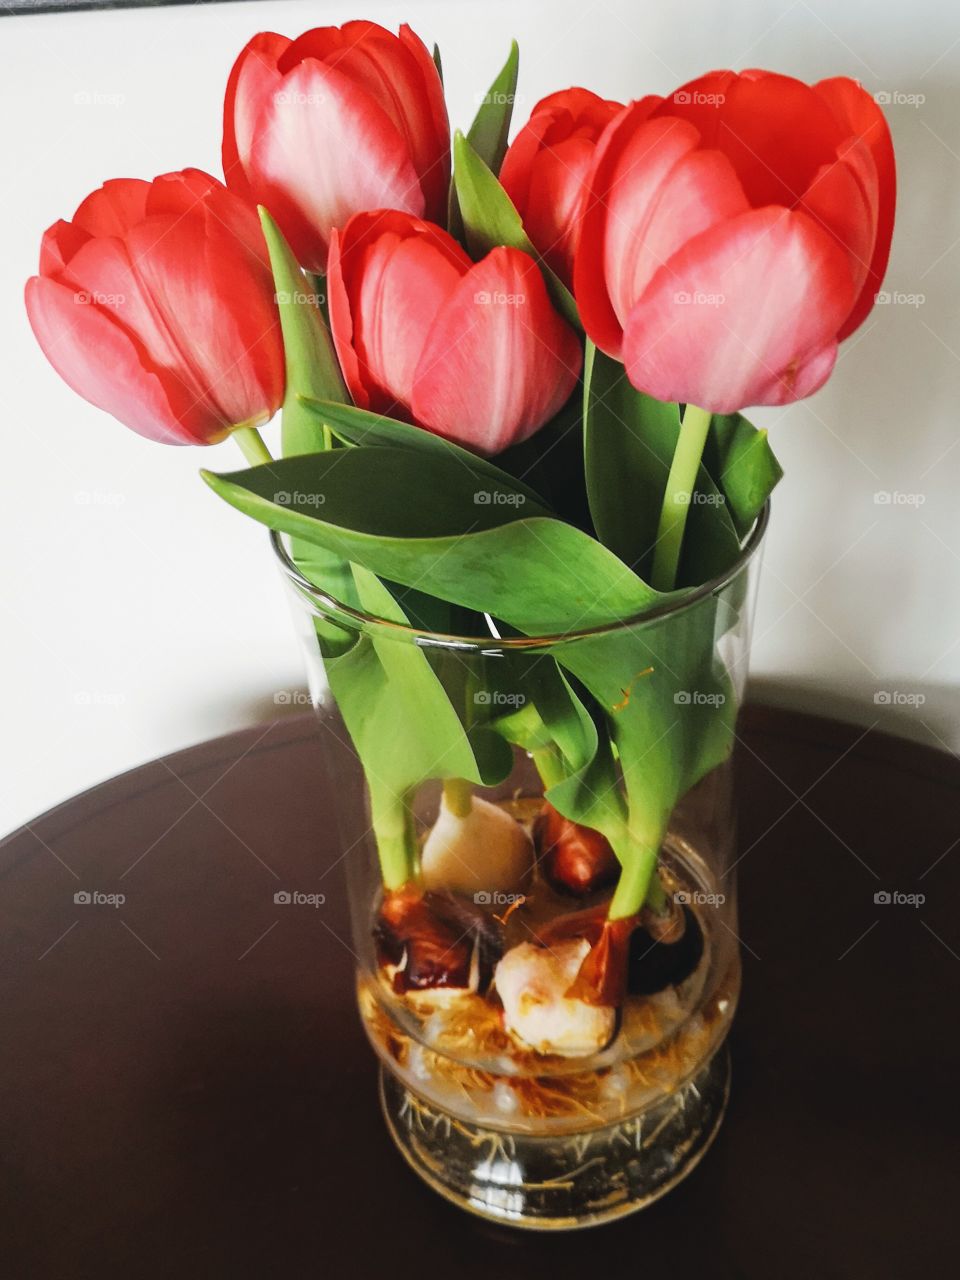 red tulips bulbs in a vase